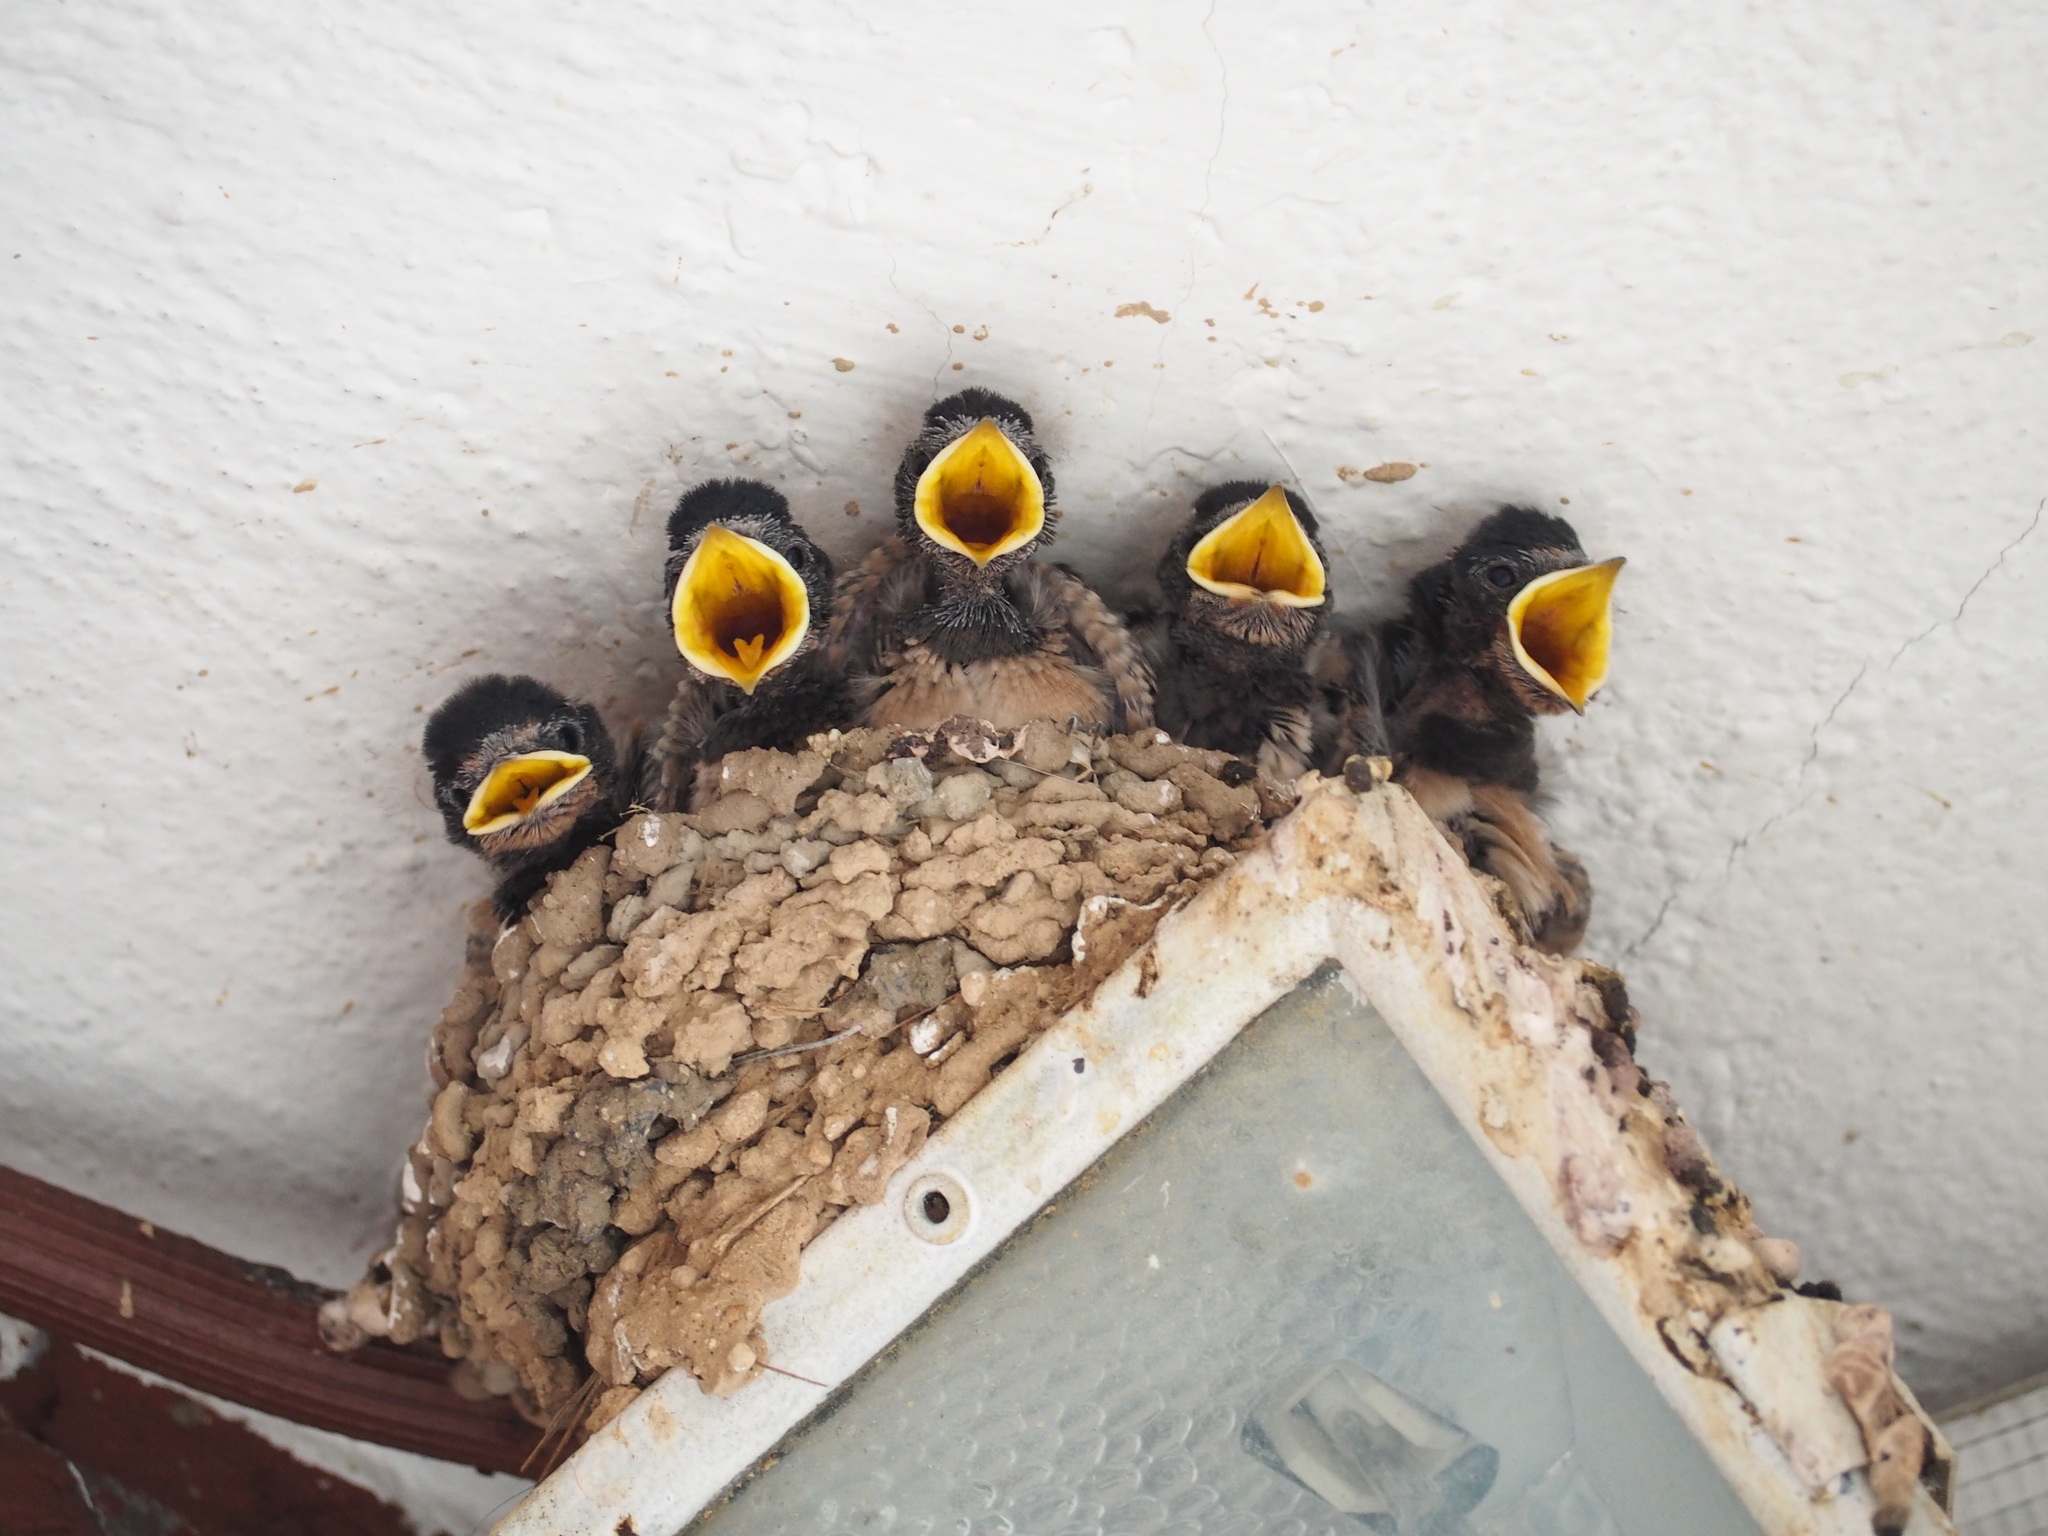 Ontario species at risk: barn swallow chicks in a nest